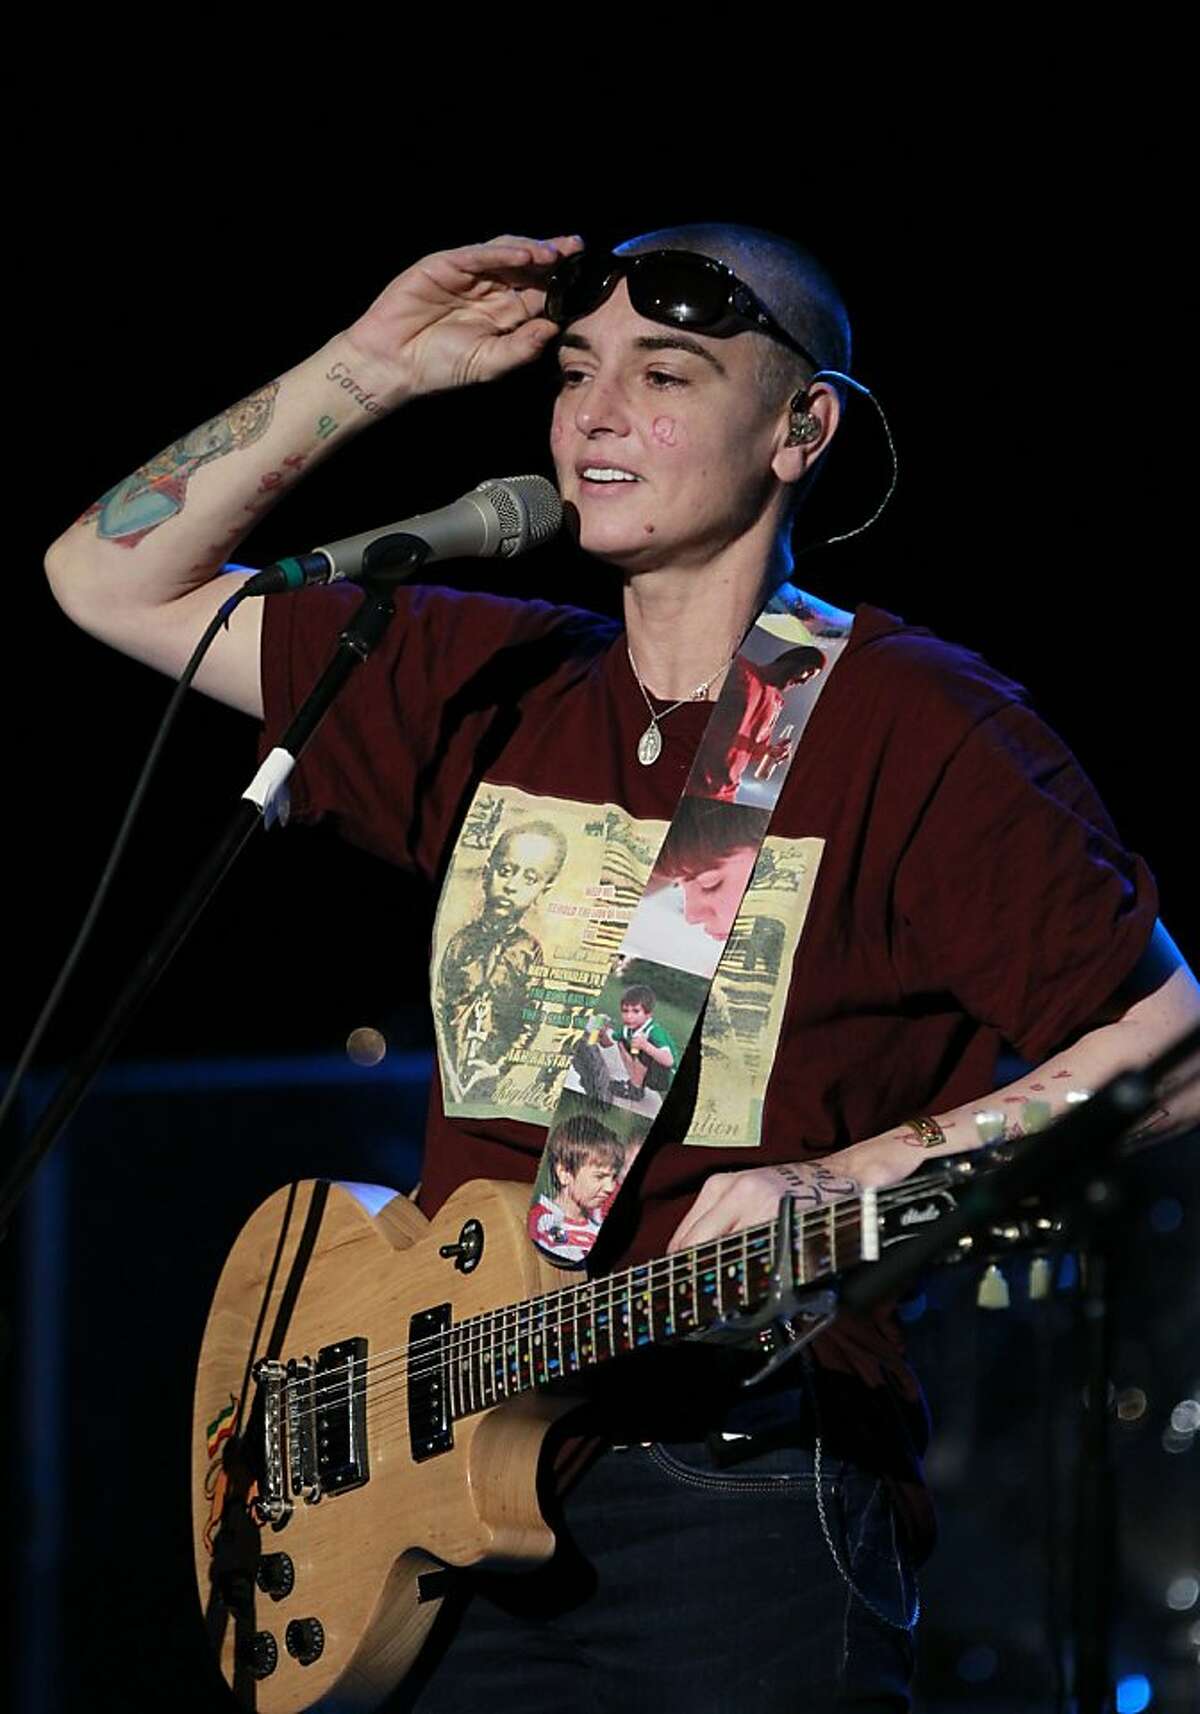 In this photo taken Tuesday, Nov. 12, 2013, Sinead O'Connor performs at the Riviera Theatre in North Tonawanda, N.Y. (AP Photo/The Buffalo News, Harry Scull Jr.) TV OUT; MAGS OUT; MANDATORY CREDIT; BATAVIA DAILY NEWS OUT; DUNKIRK OBSERVER OUT; JAMESTOWN POST-JOURNAL OUT; LOCKPORT UNION-SUN JOURNAL OUT; NIAGARA GAZETTE OUT; OLEAN TIMES-HERALD OUT; SALAMANCA PRESS OUT; TONAWANDA NEWS OUT